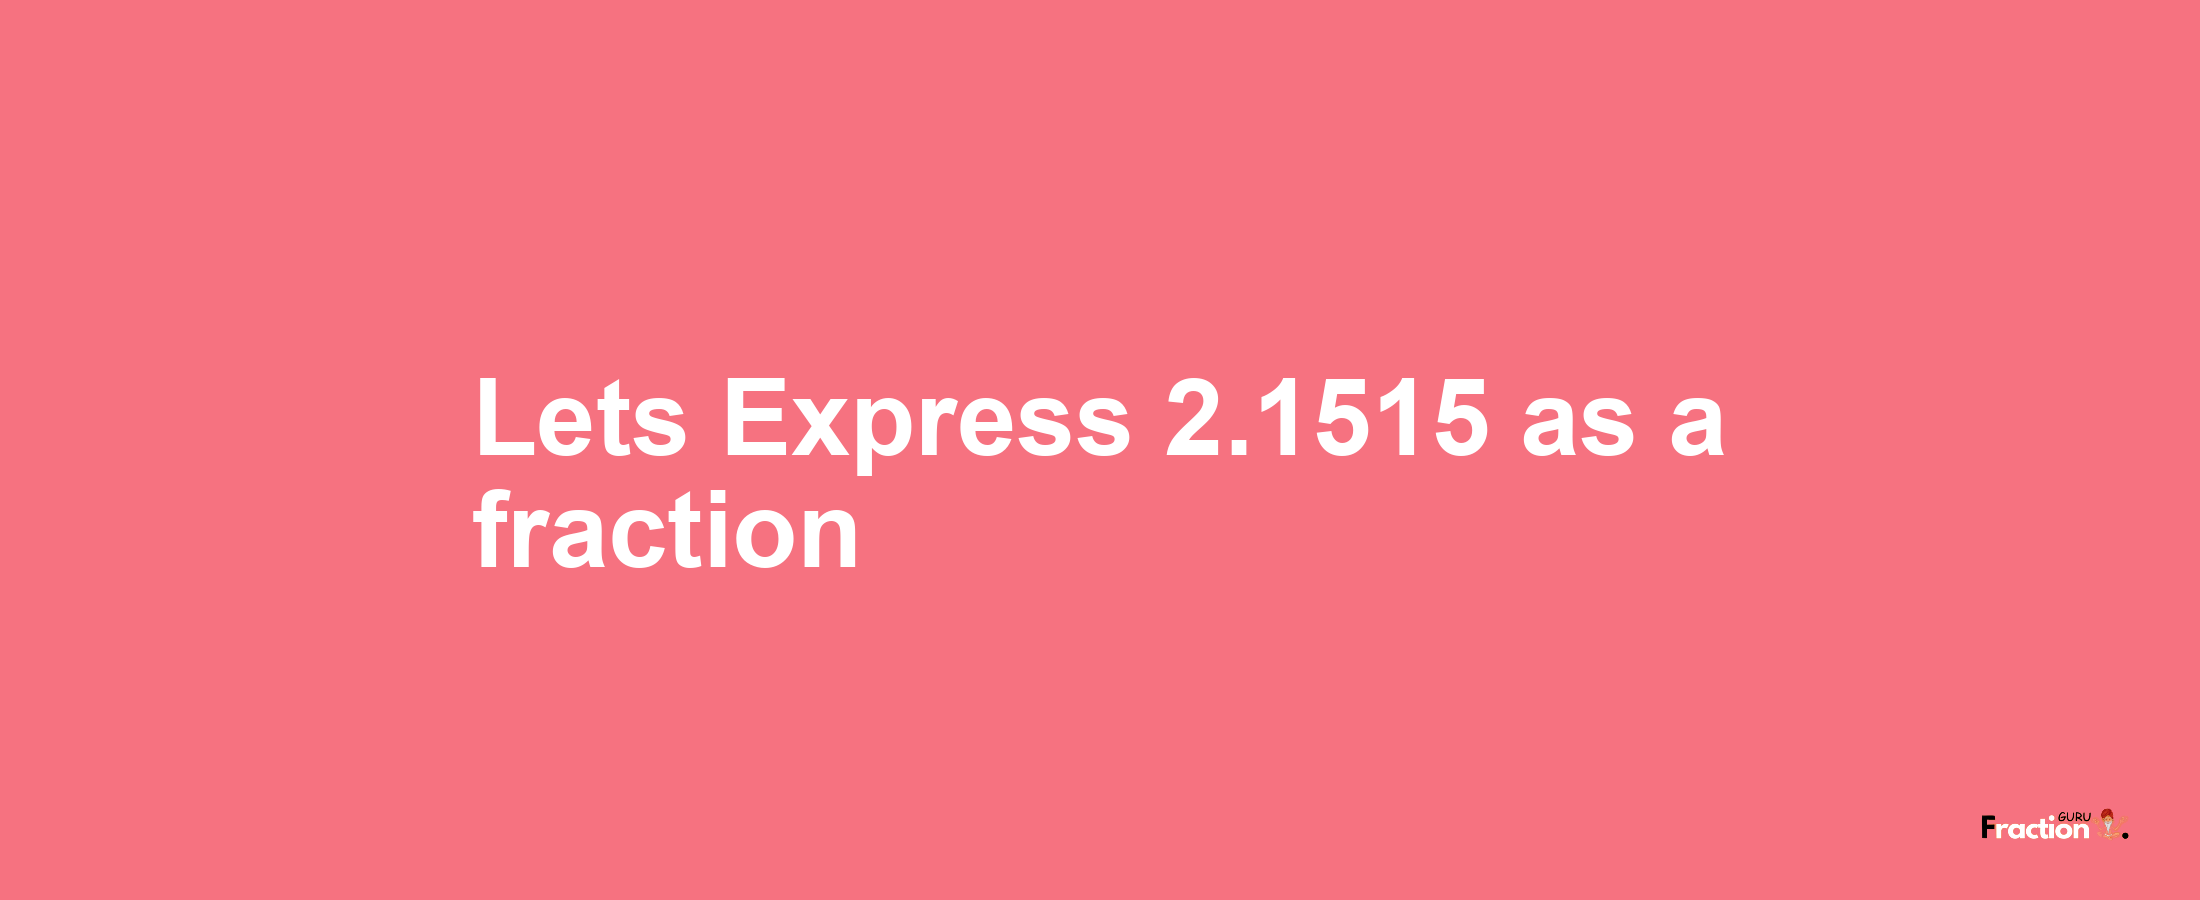 Lets Express 2.1515 as afraction